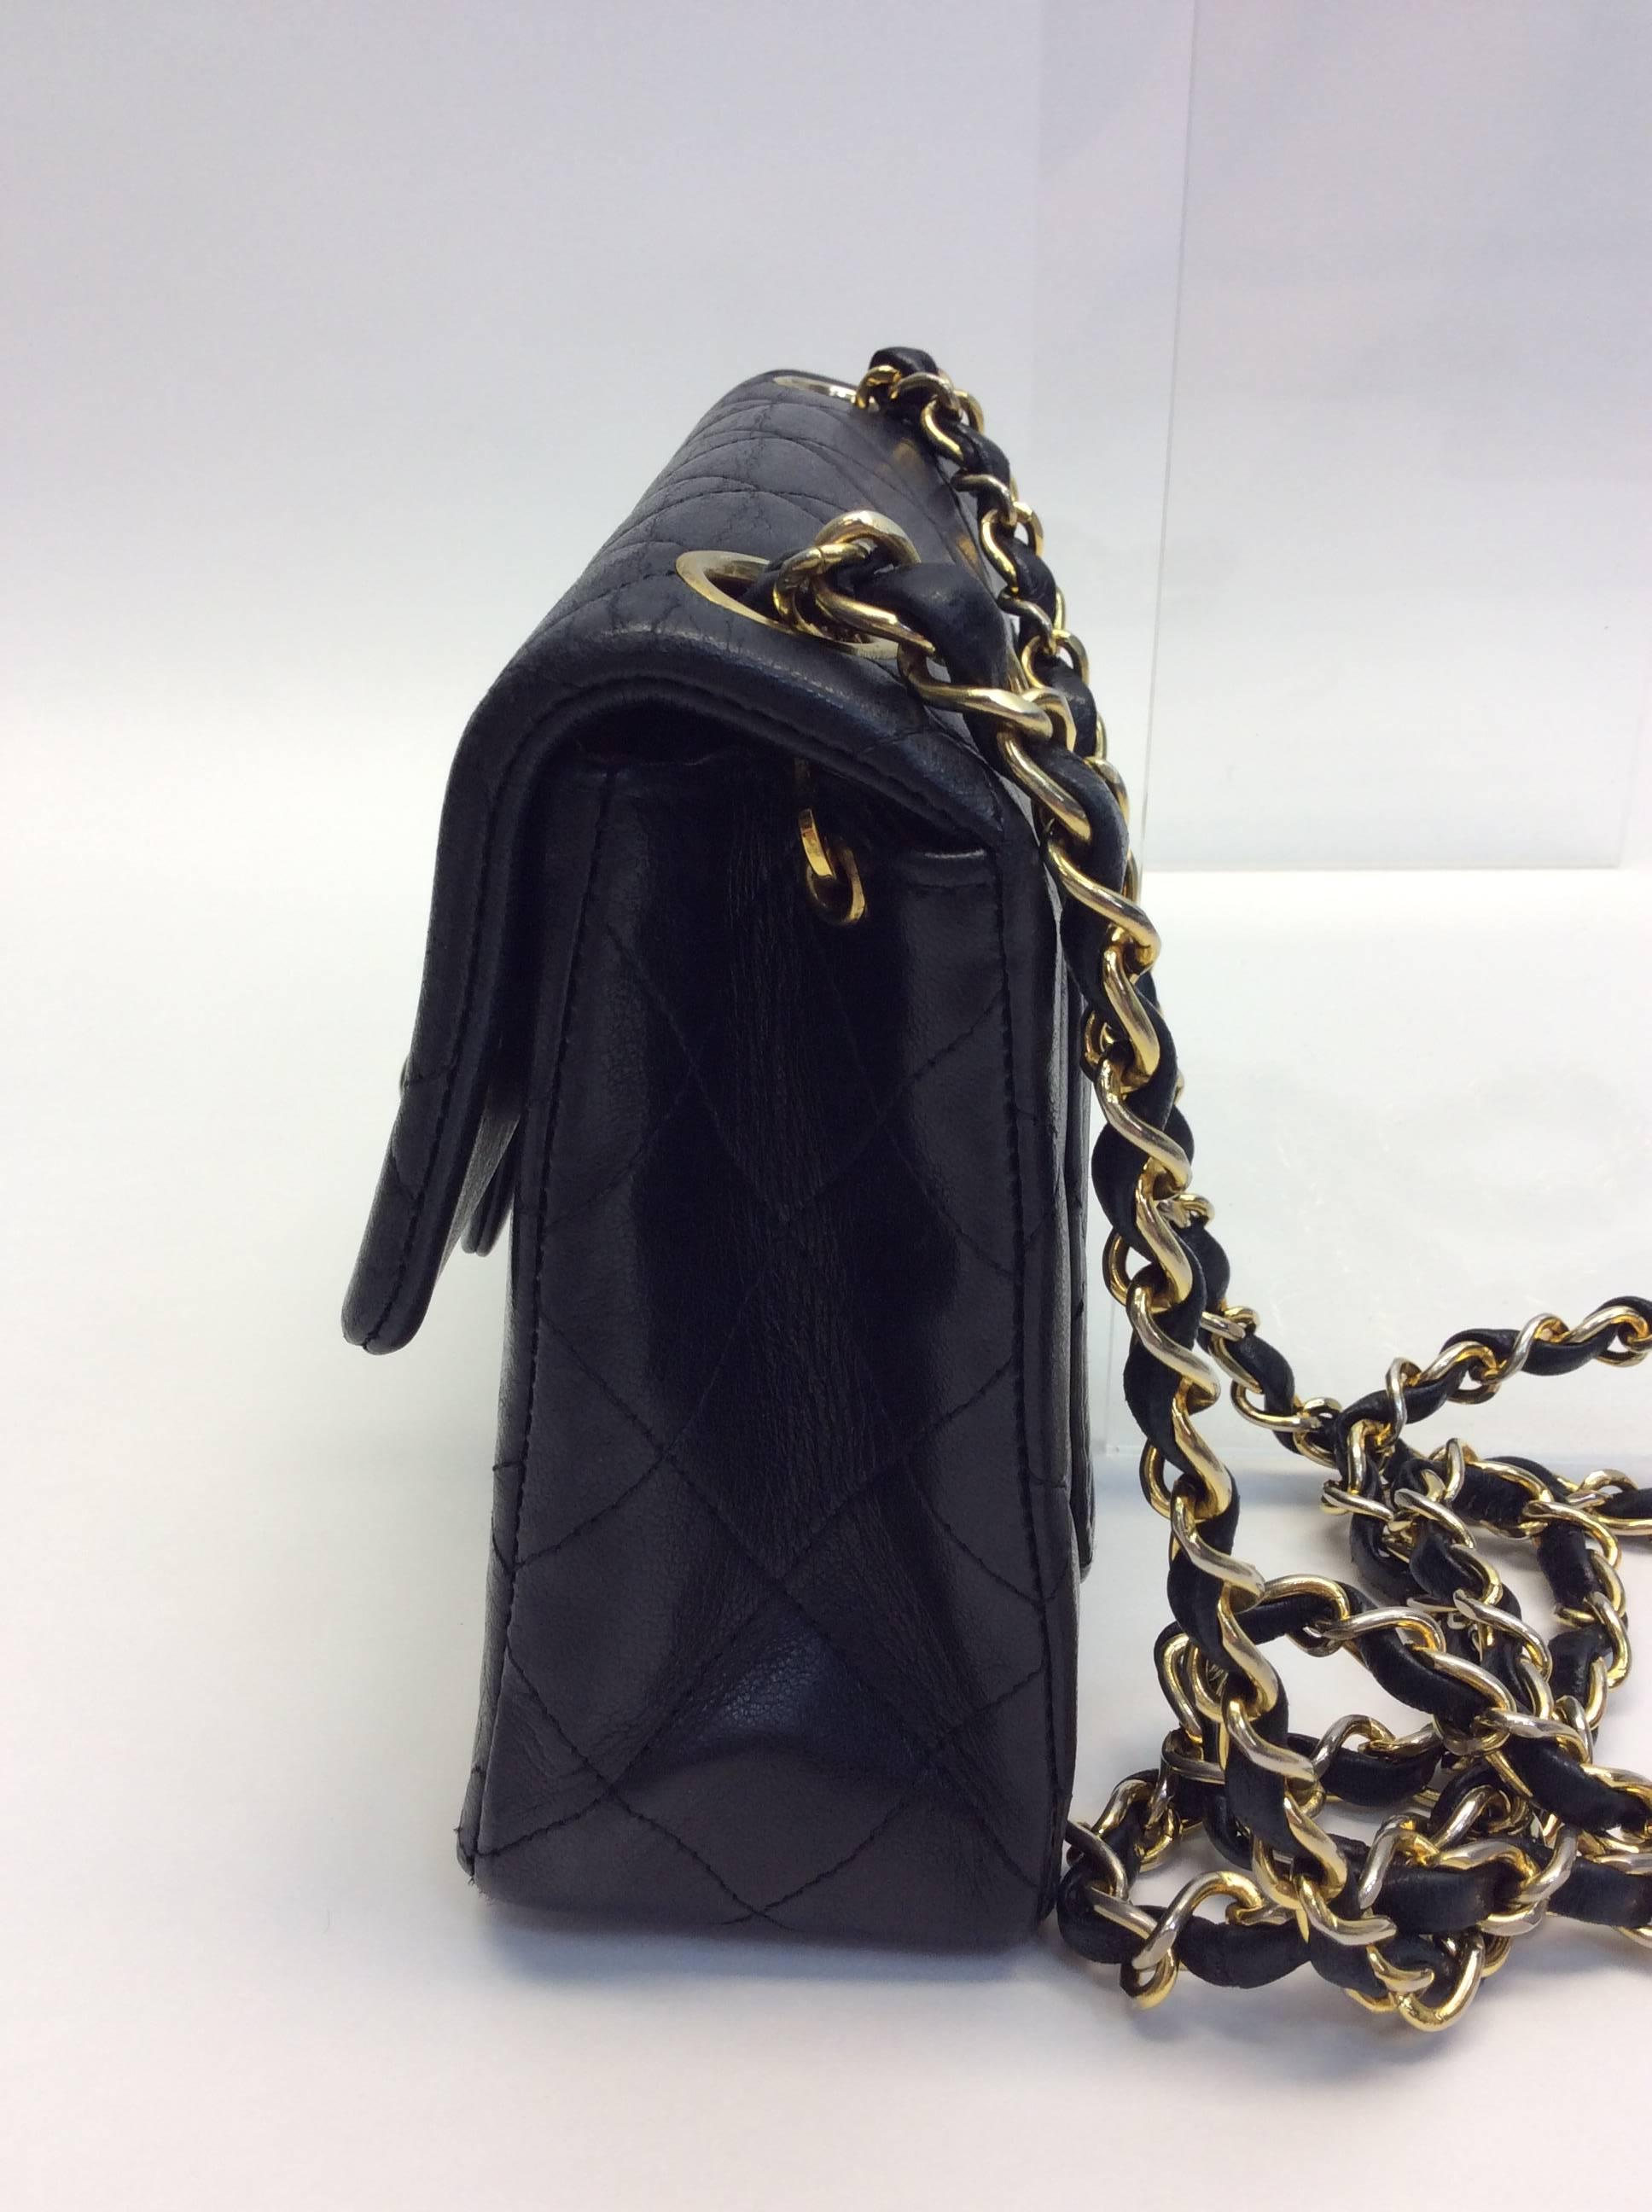 Chanel Black Leather Mini Flap Purse In Excellent Condition For Sale In Narberth, PA